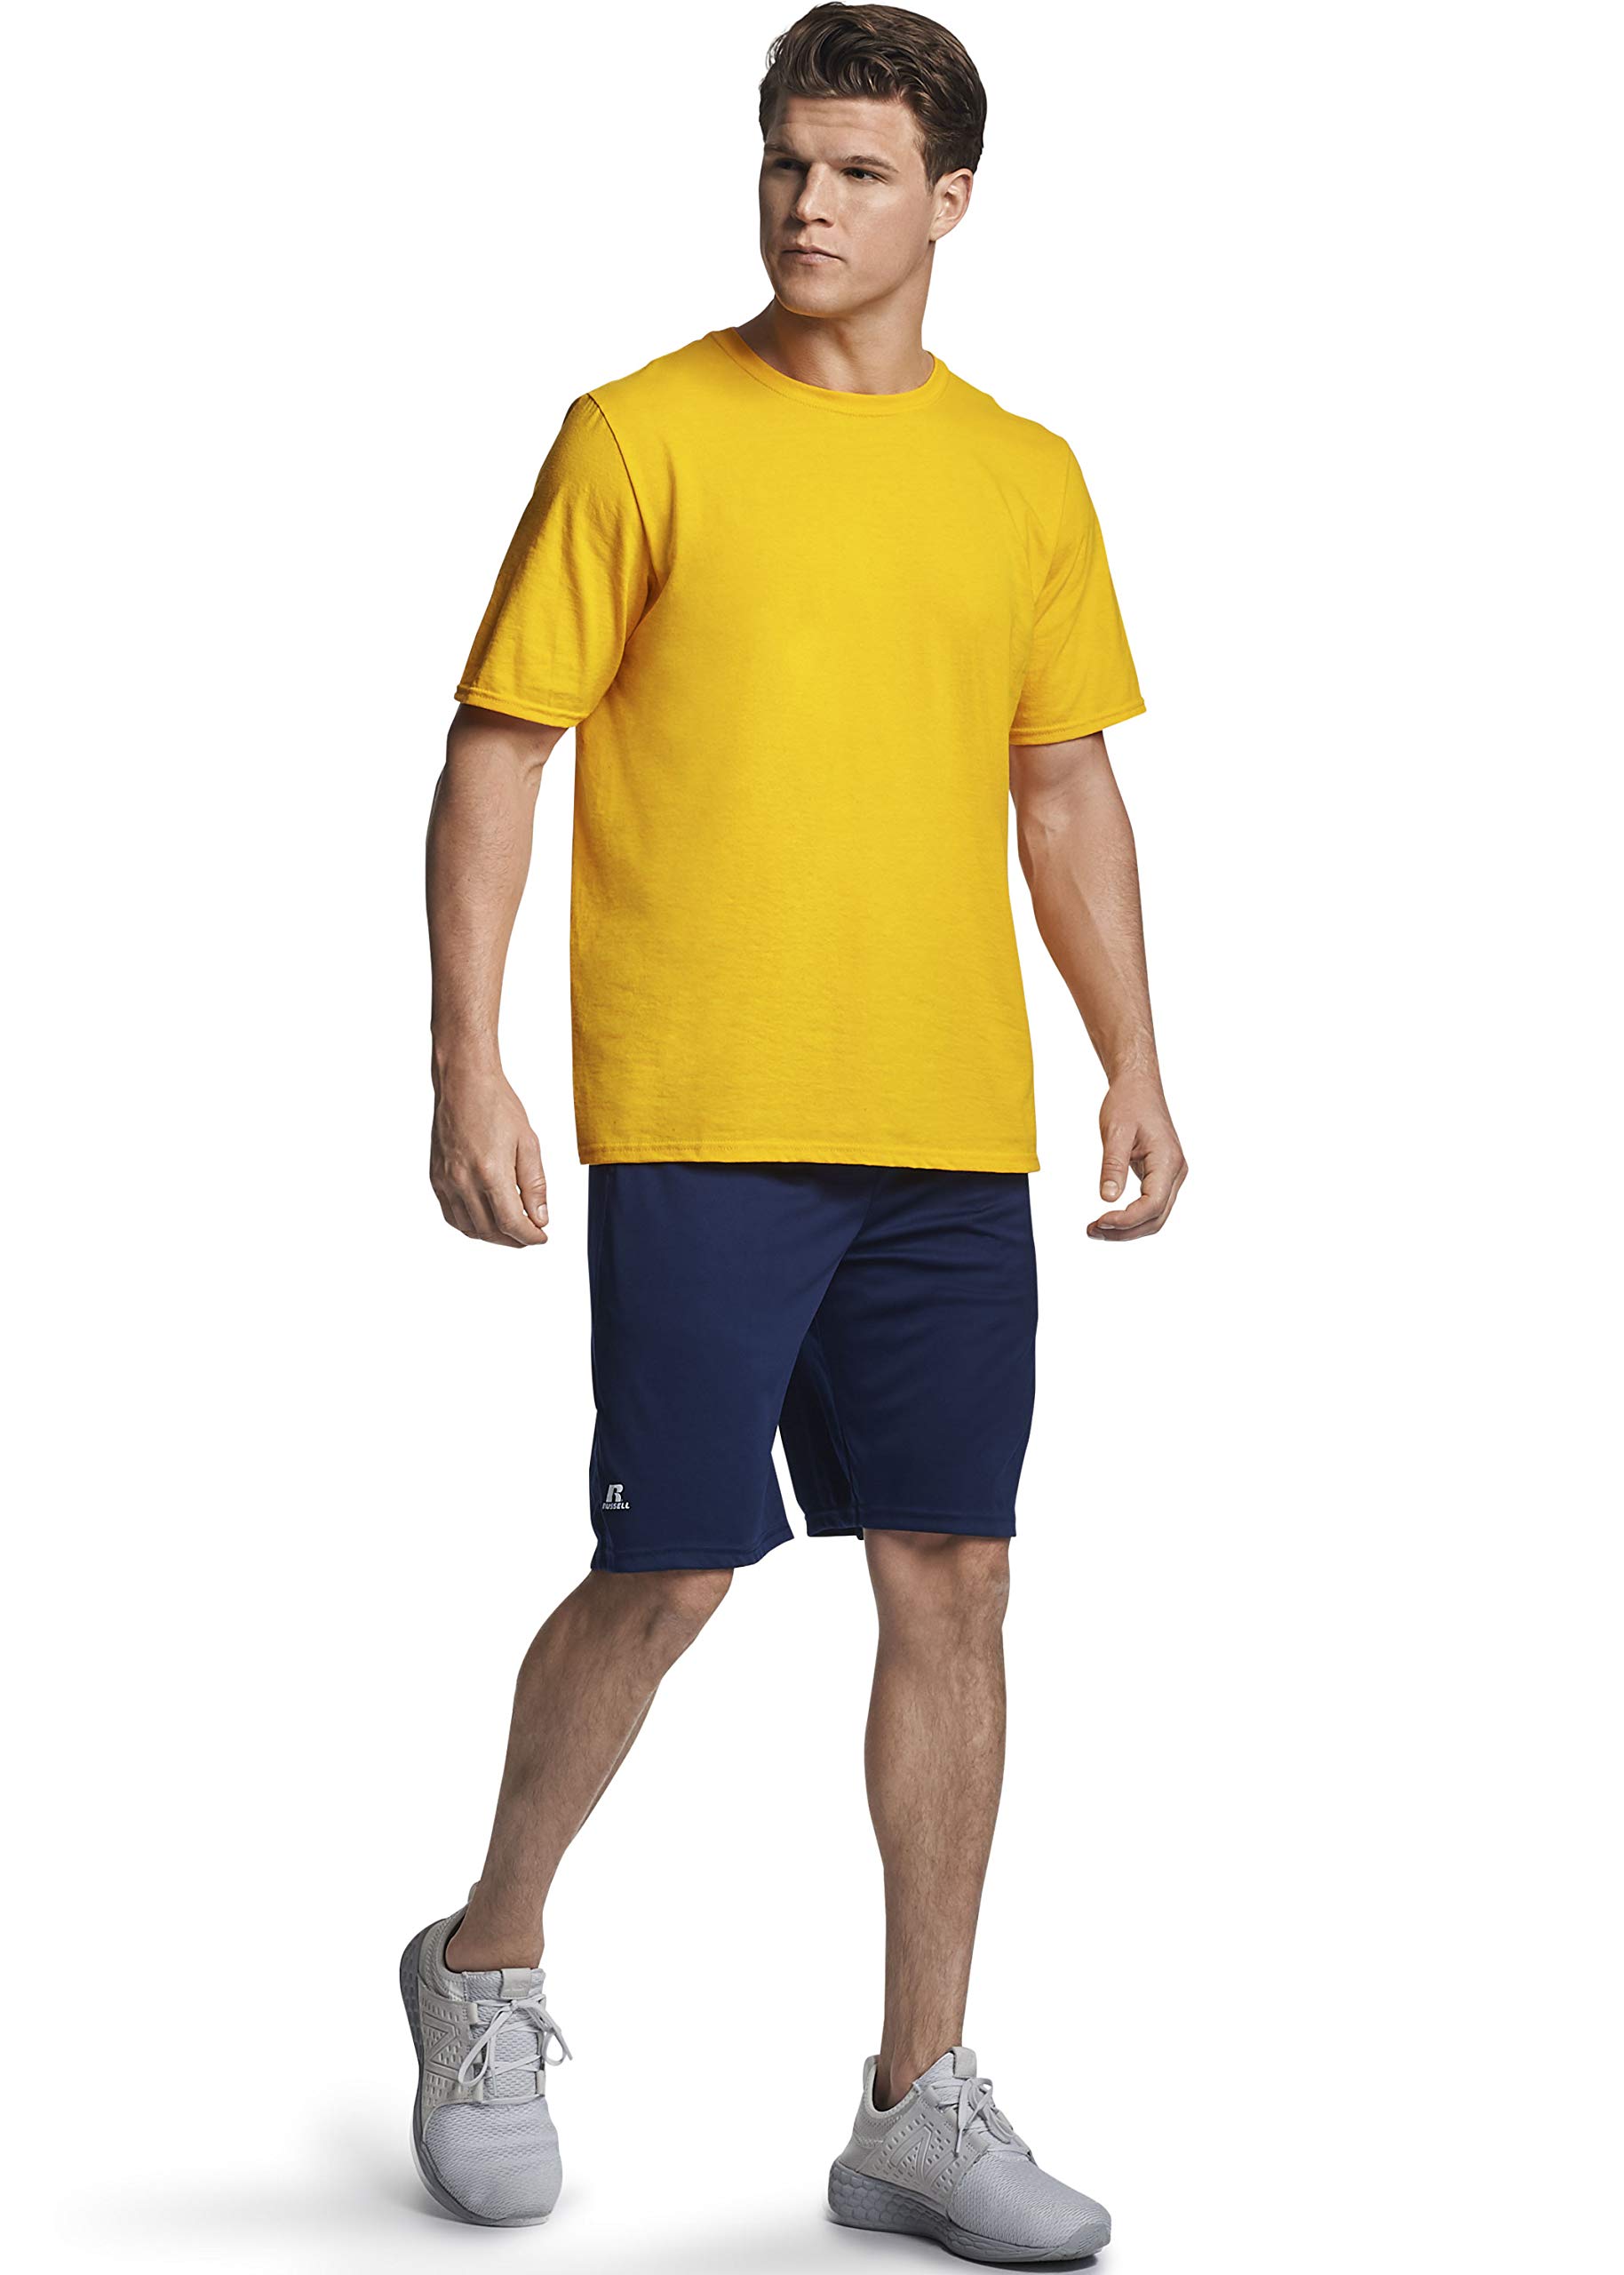 Russell Athletic Men's Dri-Power Cotton Blend Short Sleeve T-Shirts, Moisture Wicking, Odor Protection, UPF 30+, Sizes S-4X